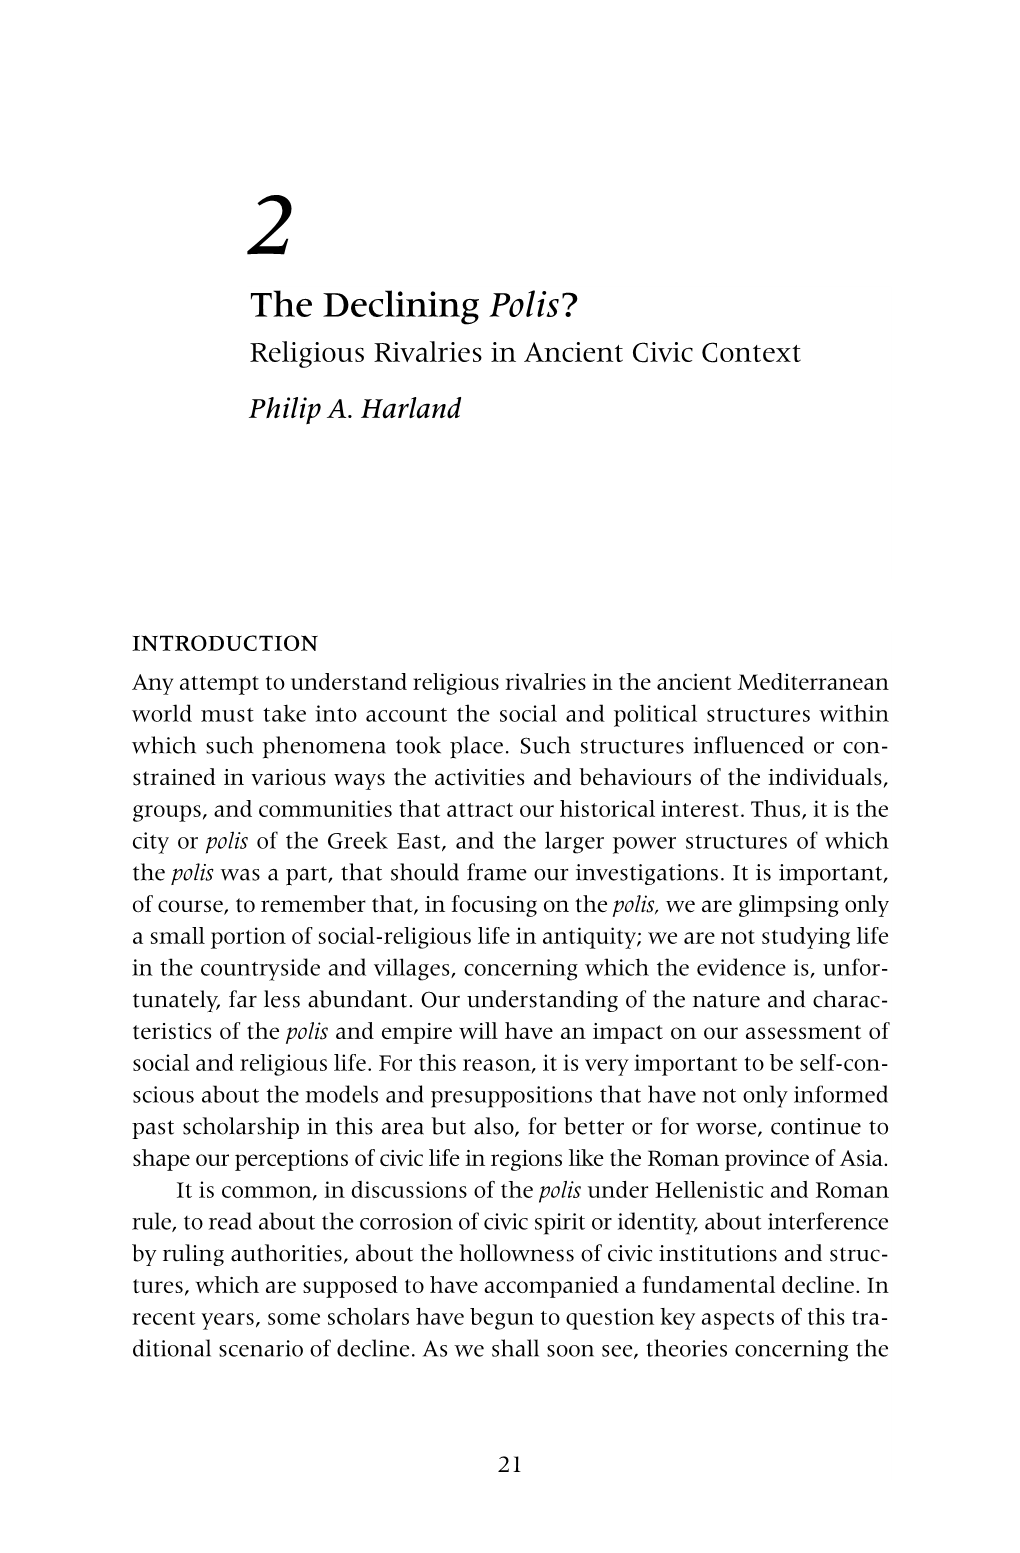 The Declining Polis? Religious Rivalries in Ancient Civic Context Philip A